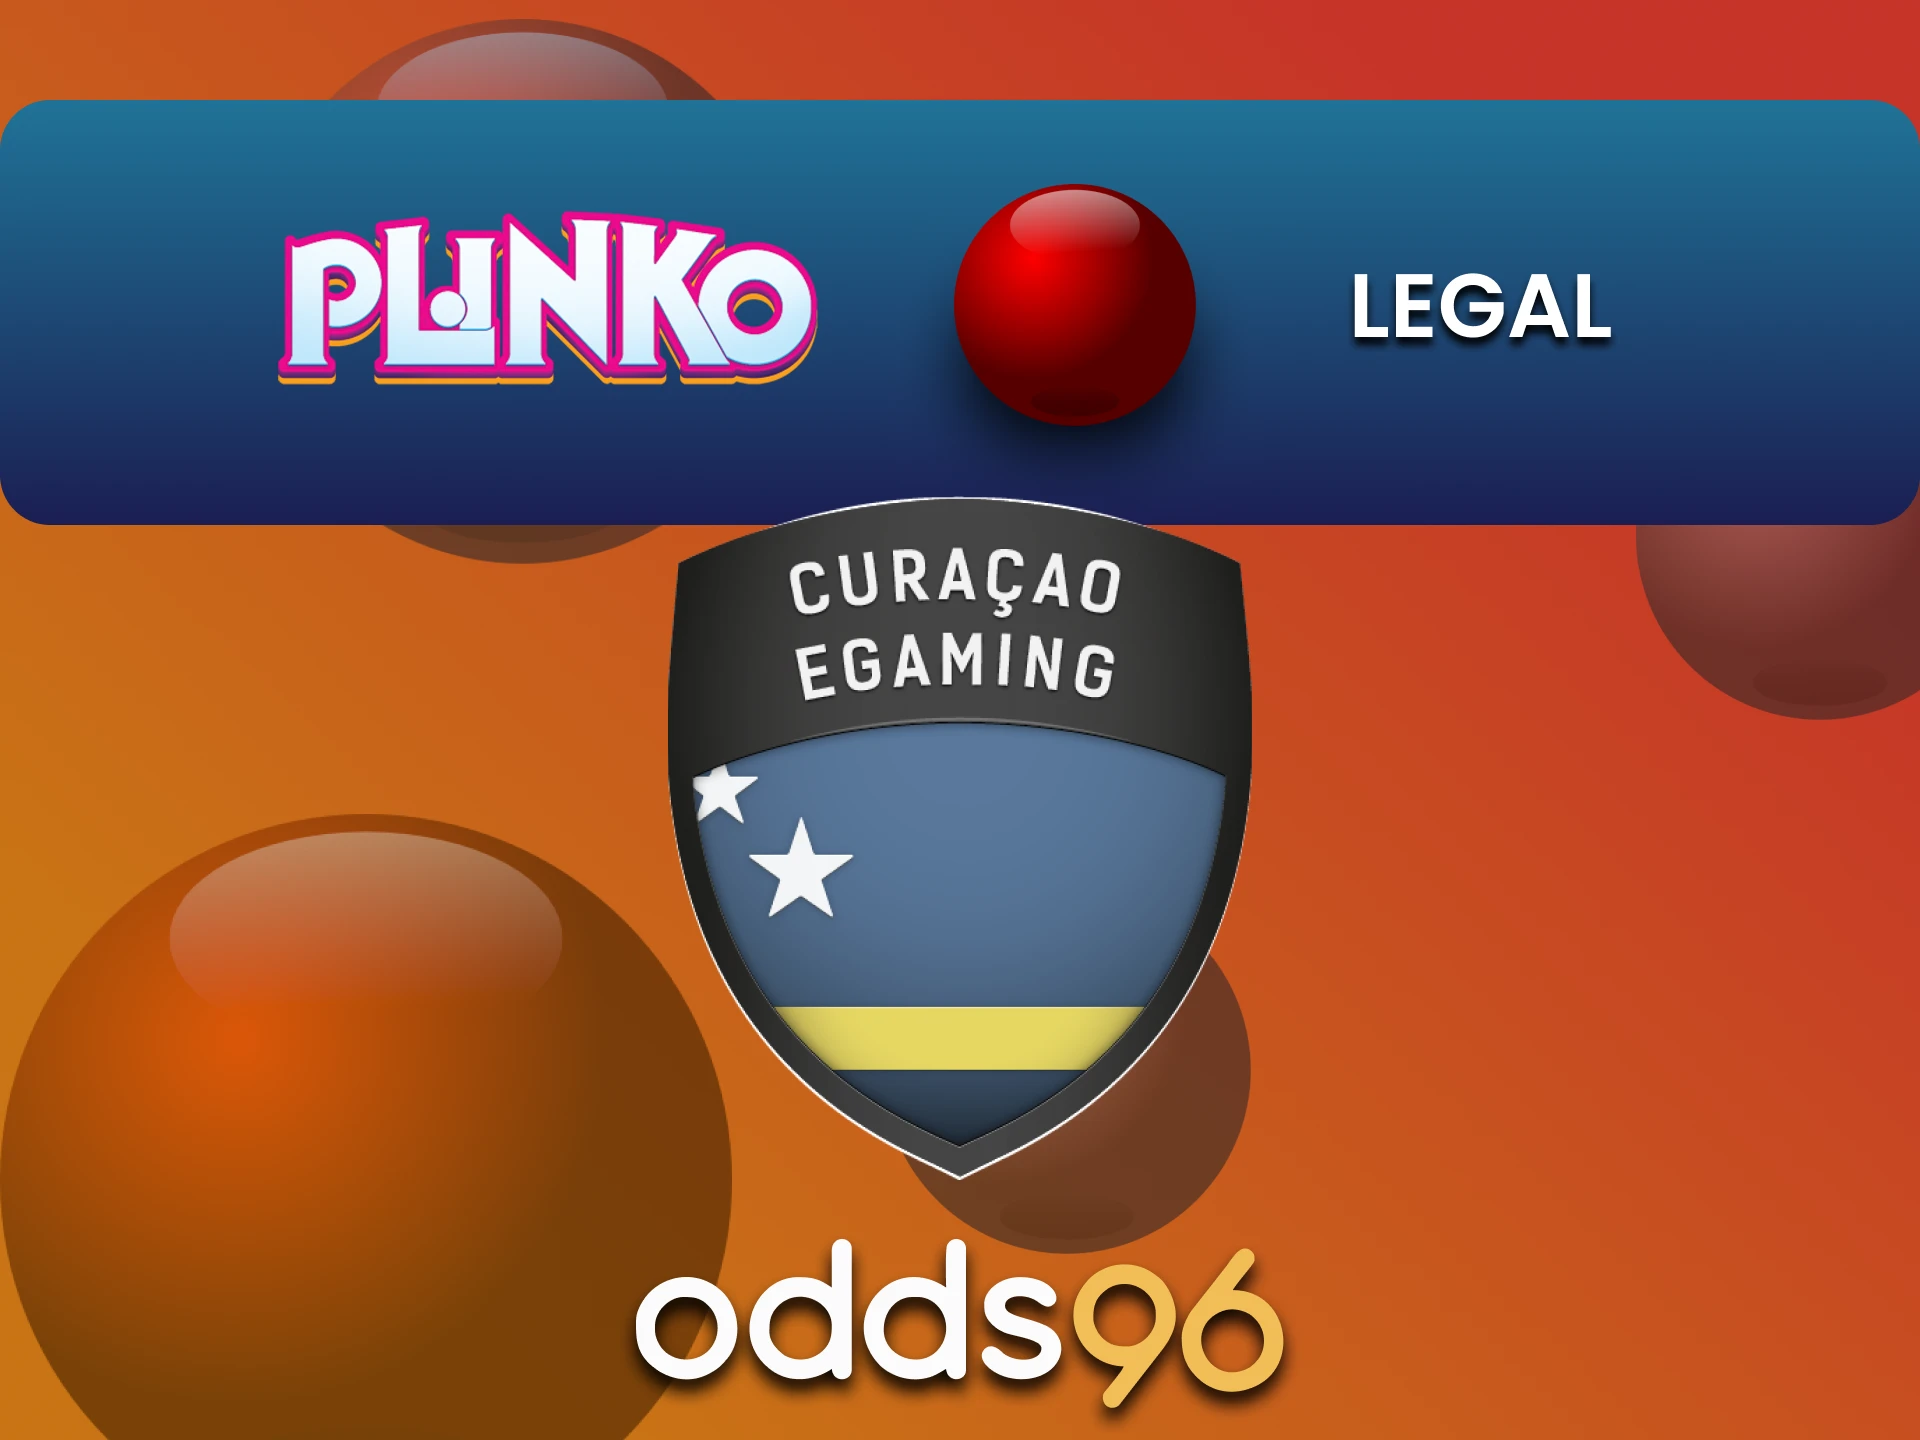 Odds96 is legal for Plinko players in India.